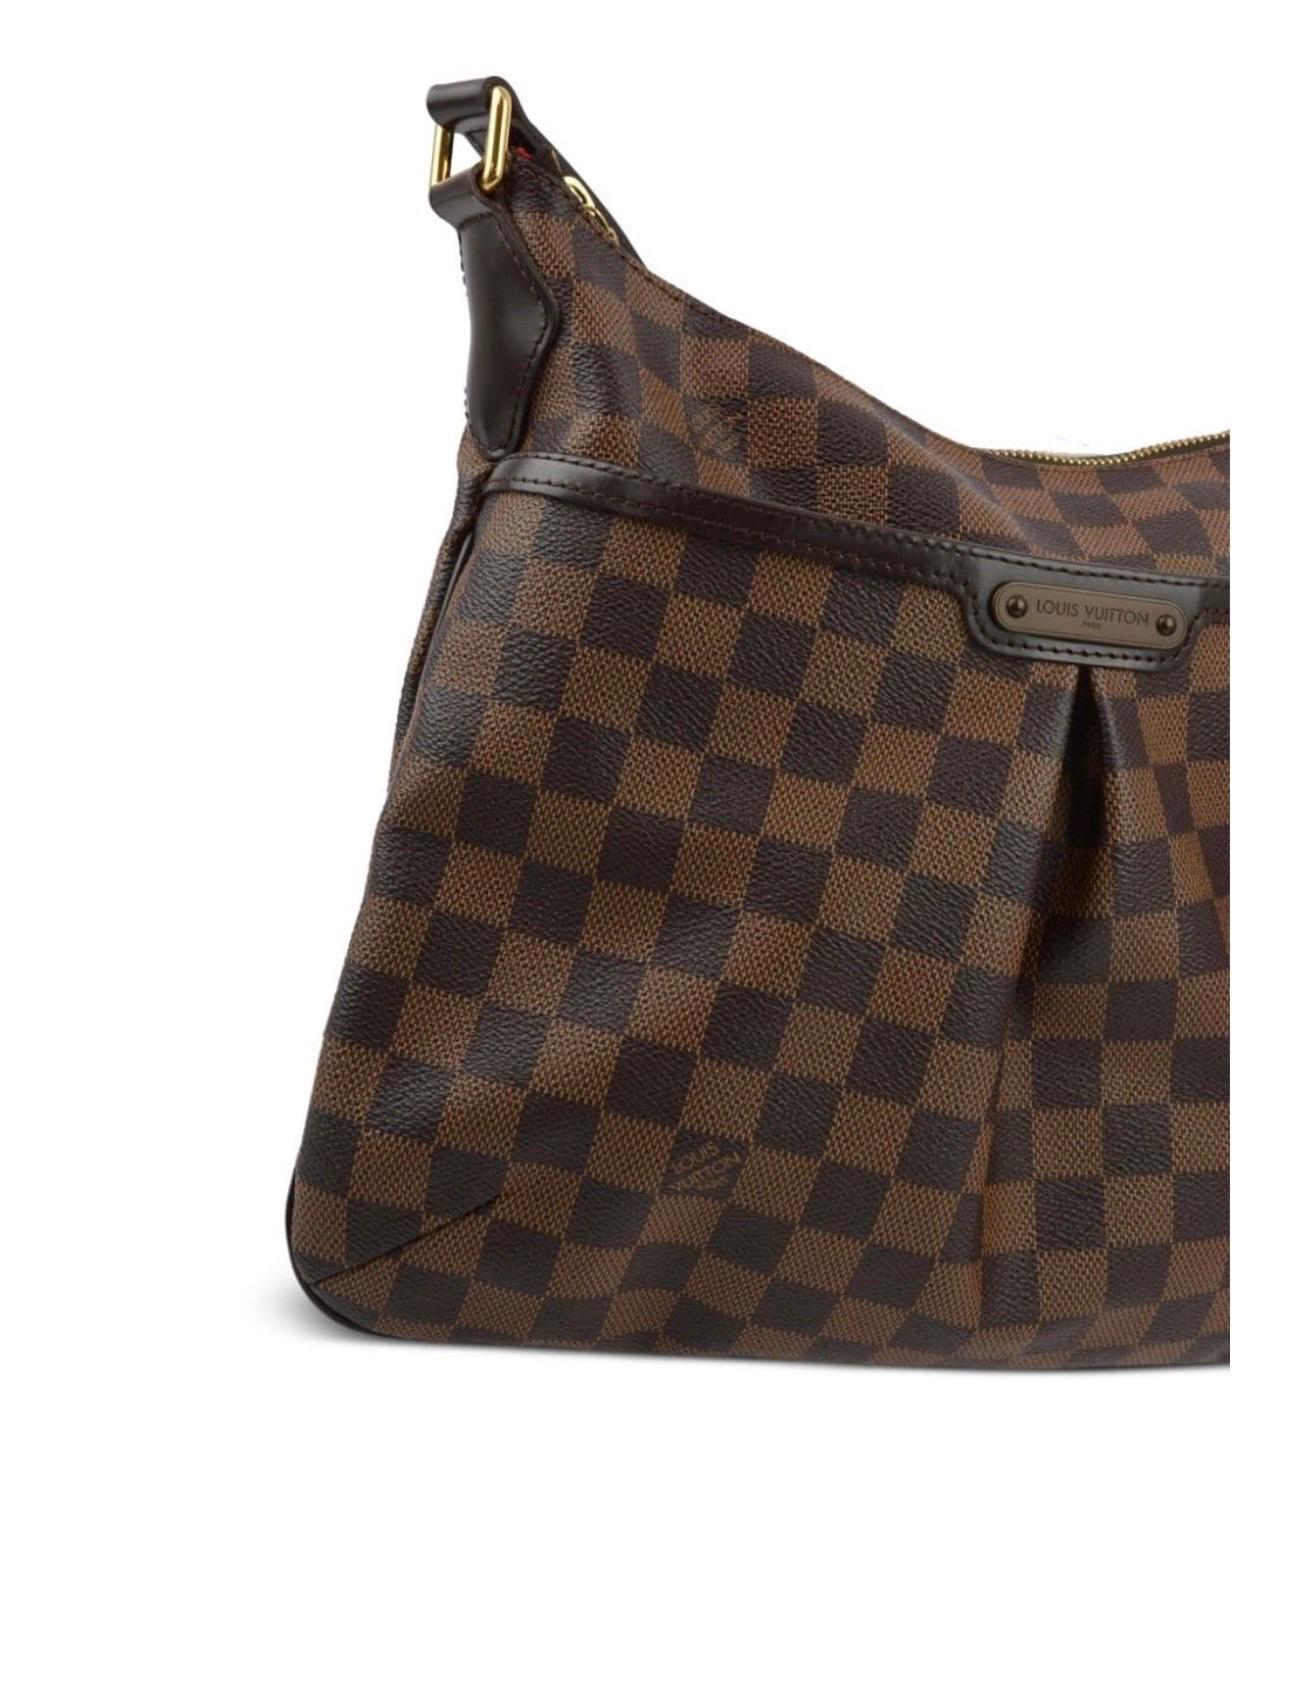 Louis Vuitton Bloomsbury PM Damier Ebene Canvas Crossbody Bag
Adjustable crossbody strap
Top zip closure
Goldtone hardware
Outside slip pocket
Inside slip pocket
LXR authenticity card included
Date code: SP5018
Lined
Leather trim
Coated canvas
Made